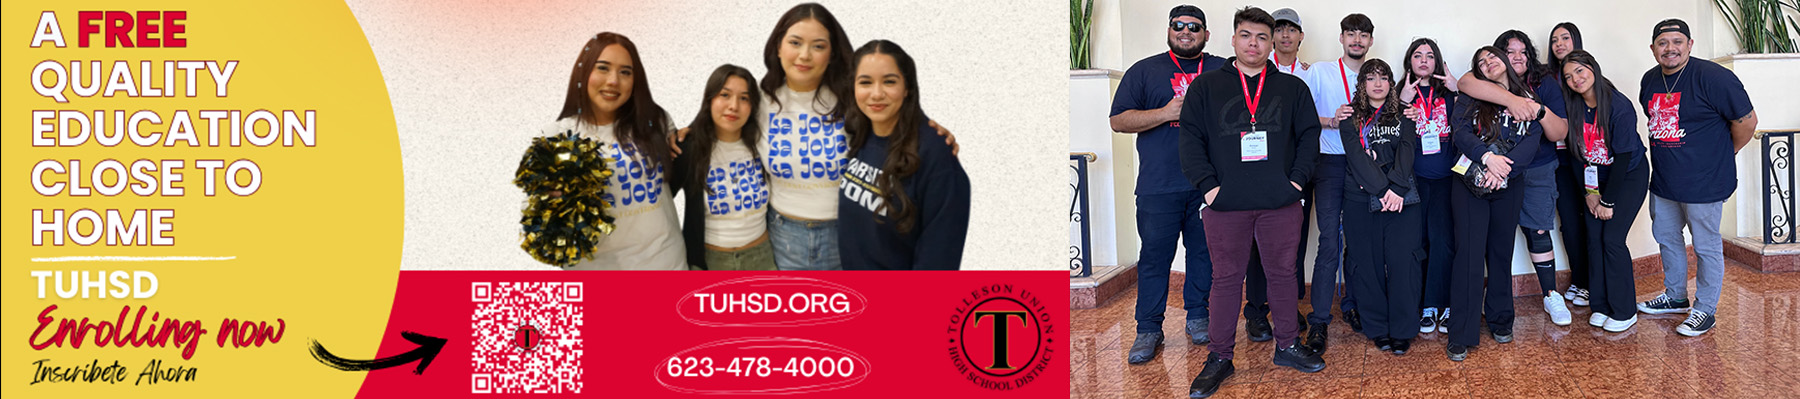 SUPPORT OUR SCHOOLS WITH A TAX CREDIT DONATION! Single person donation of $200 or married joint filing donation of $400 Remember TUHSD when you're filing your taxes! | Group of students